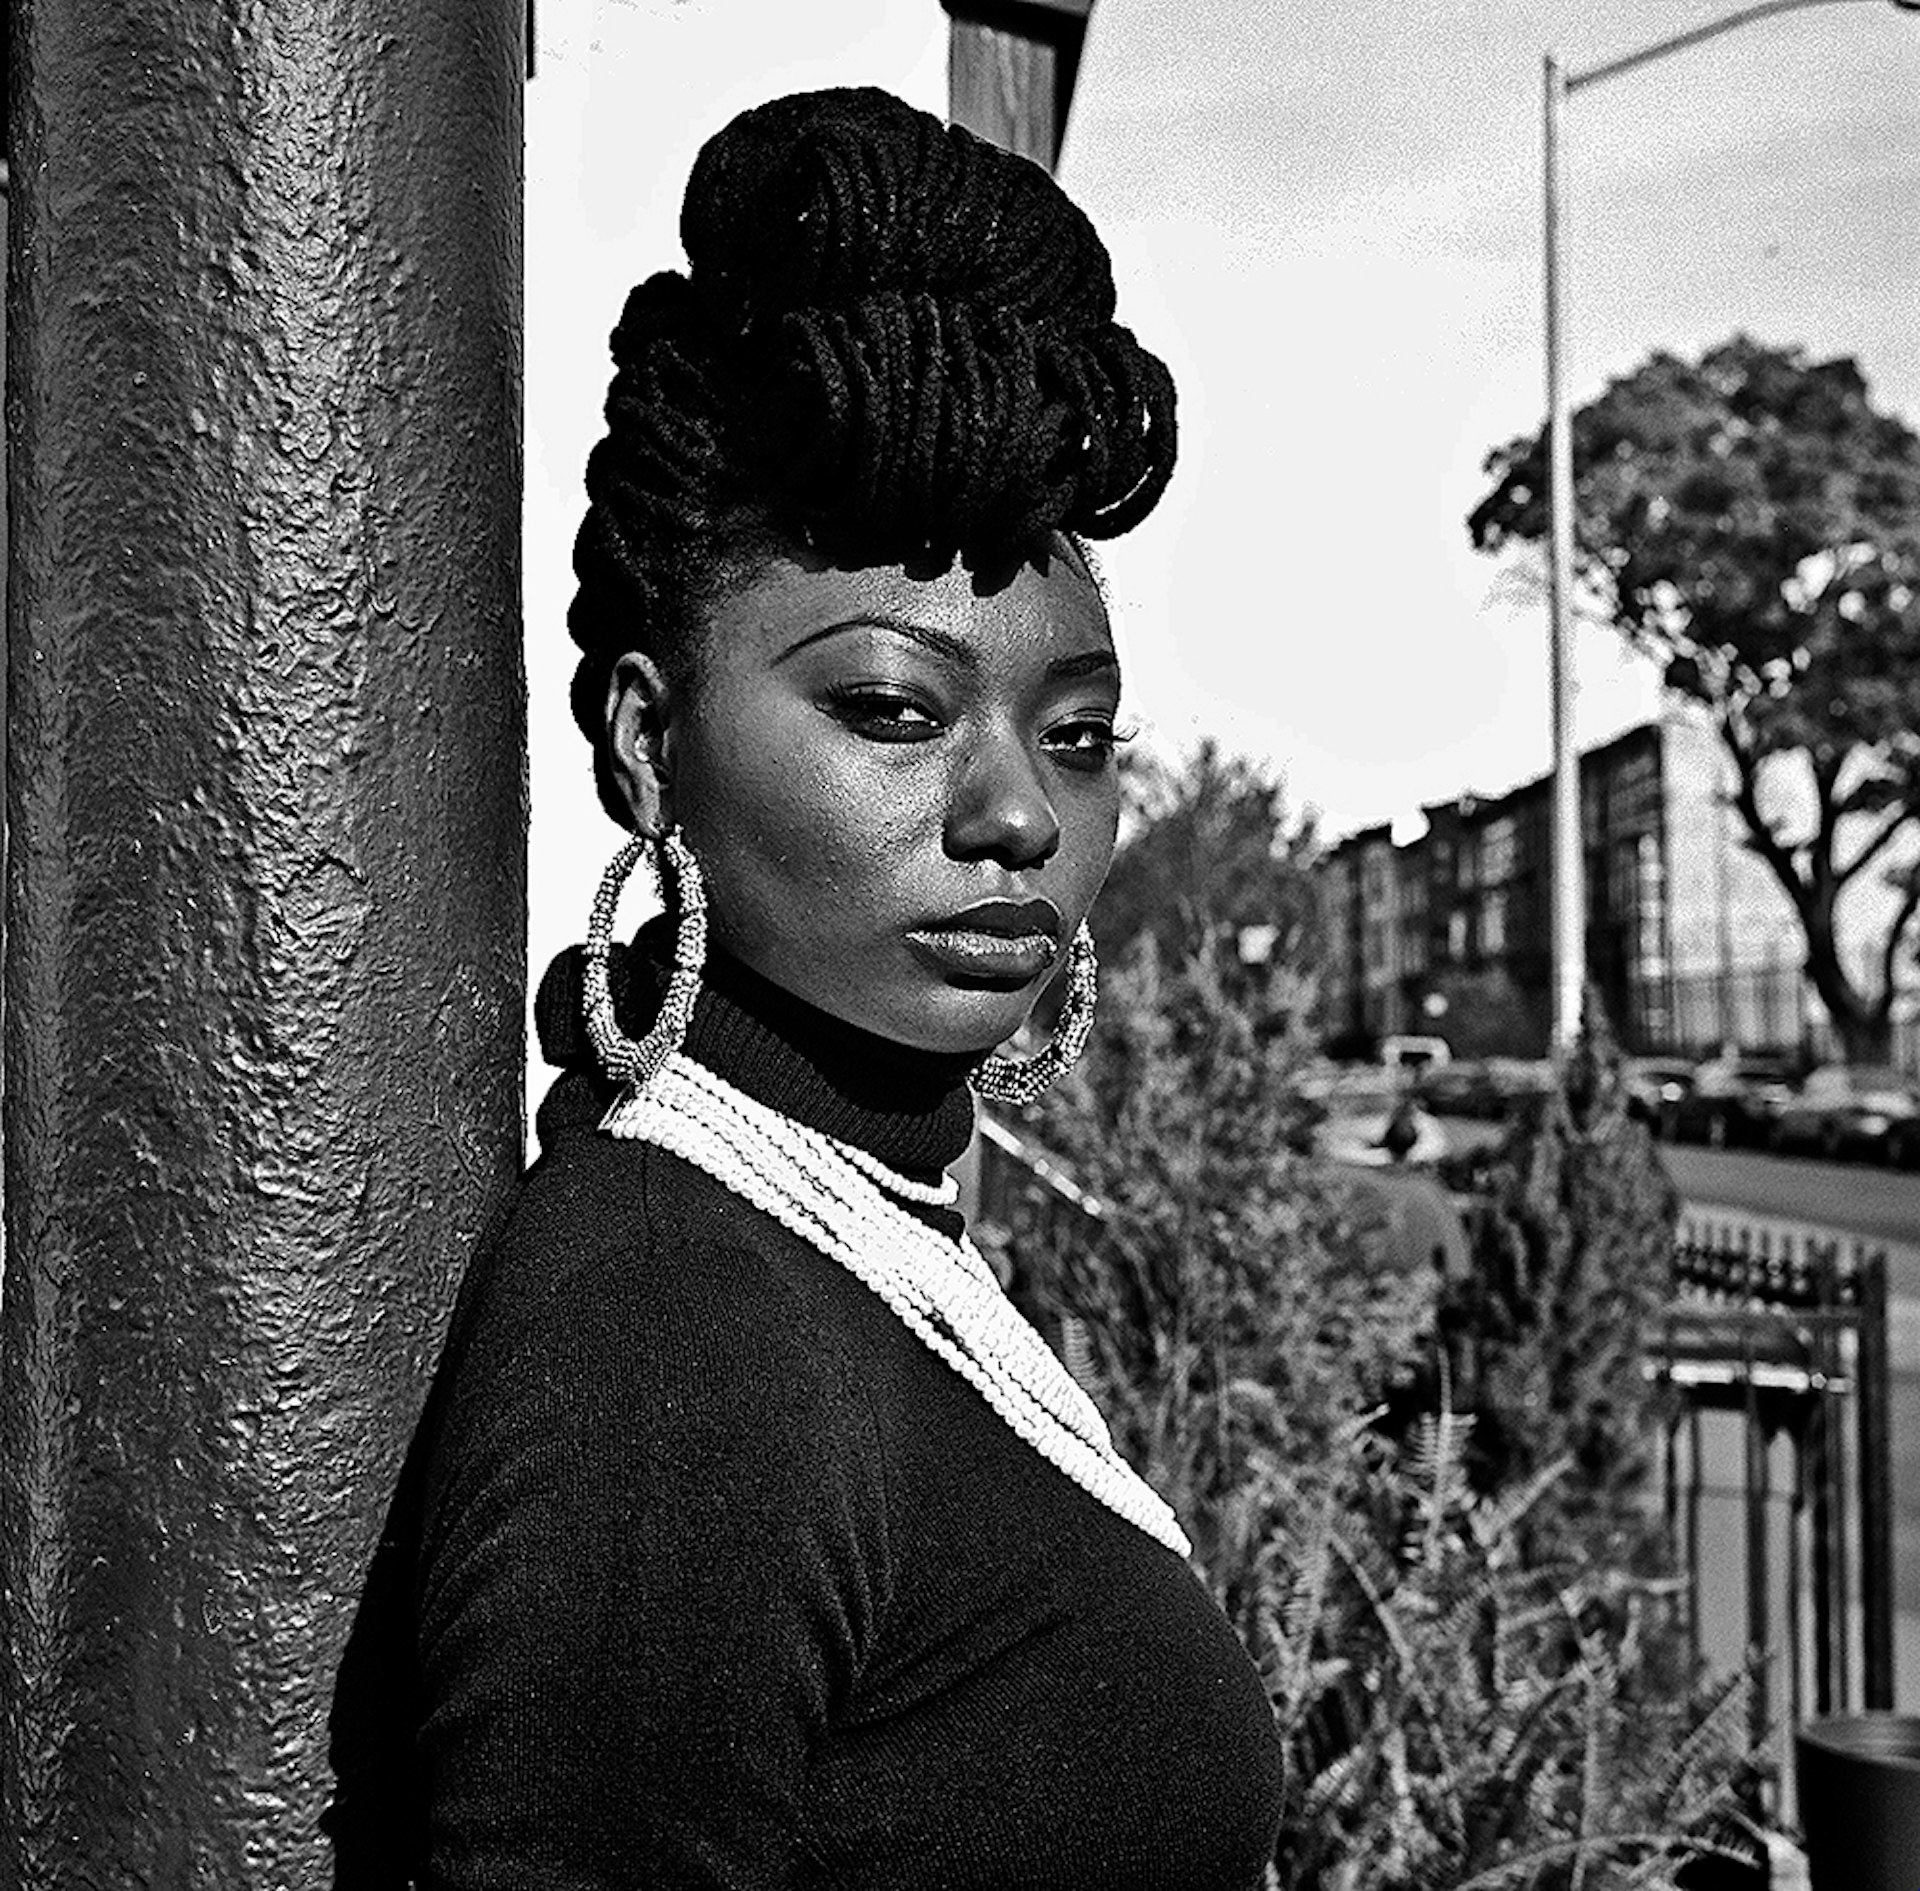 In Pictures: Pioneering black photography collective Kamoinge